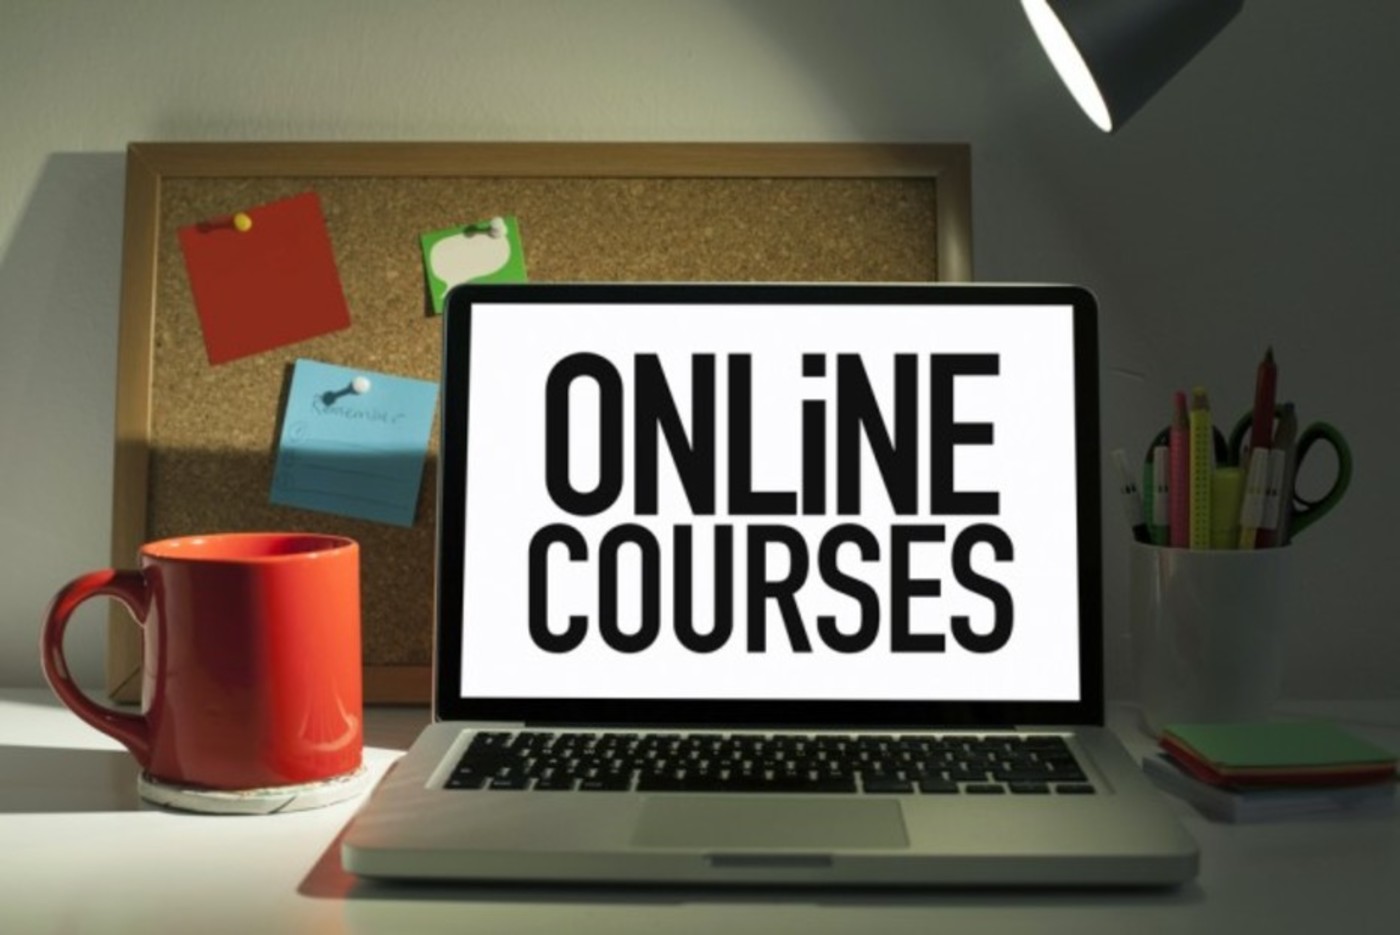 online courses on education